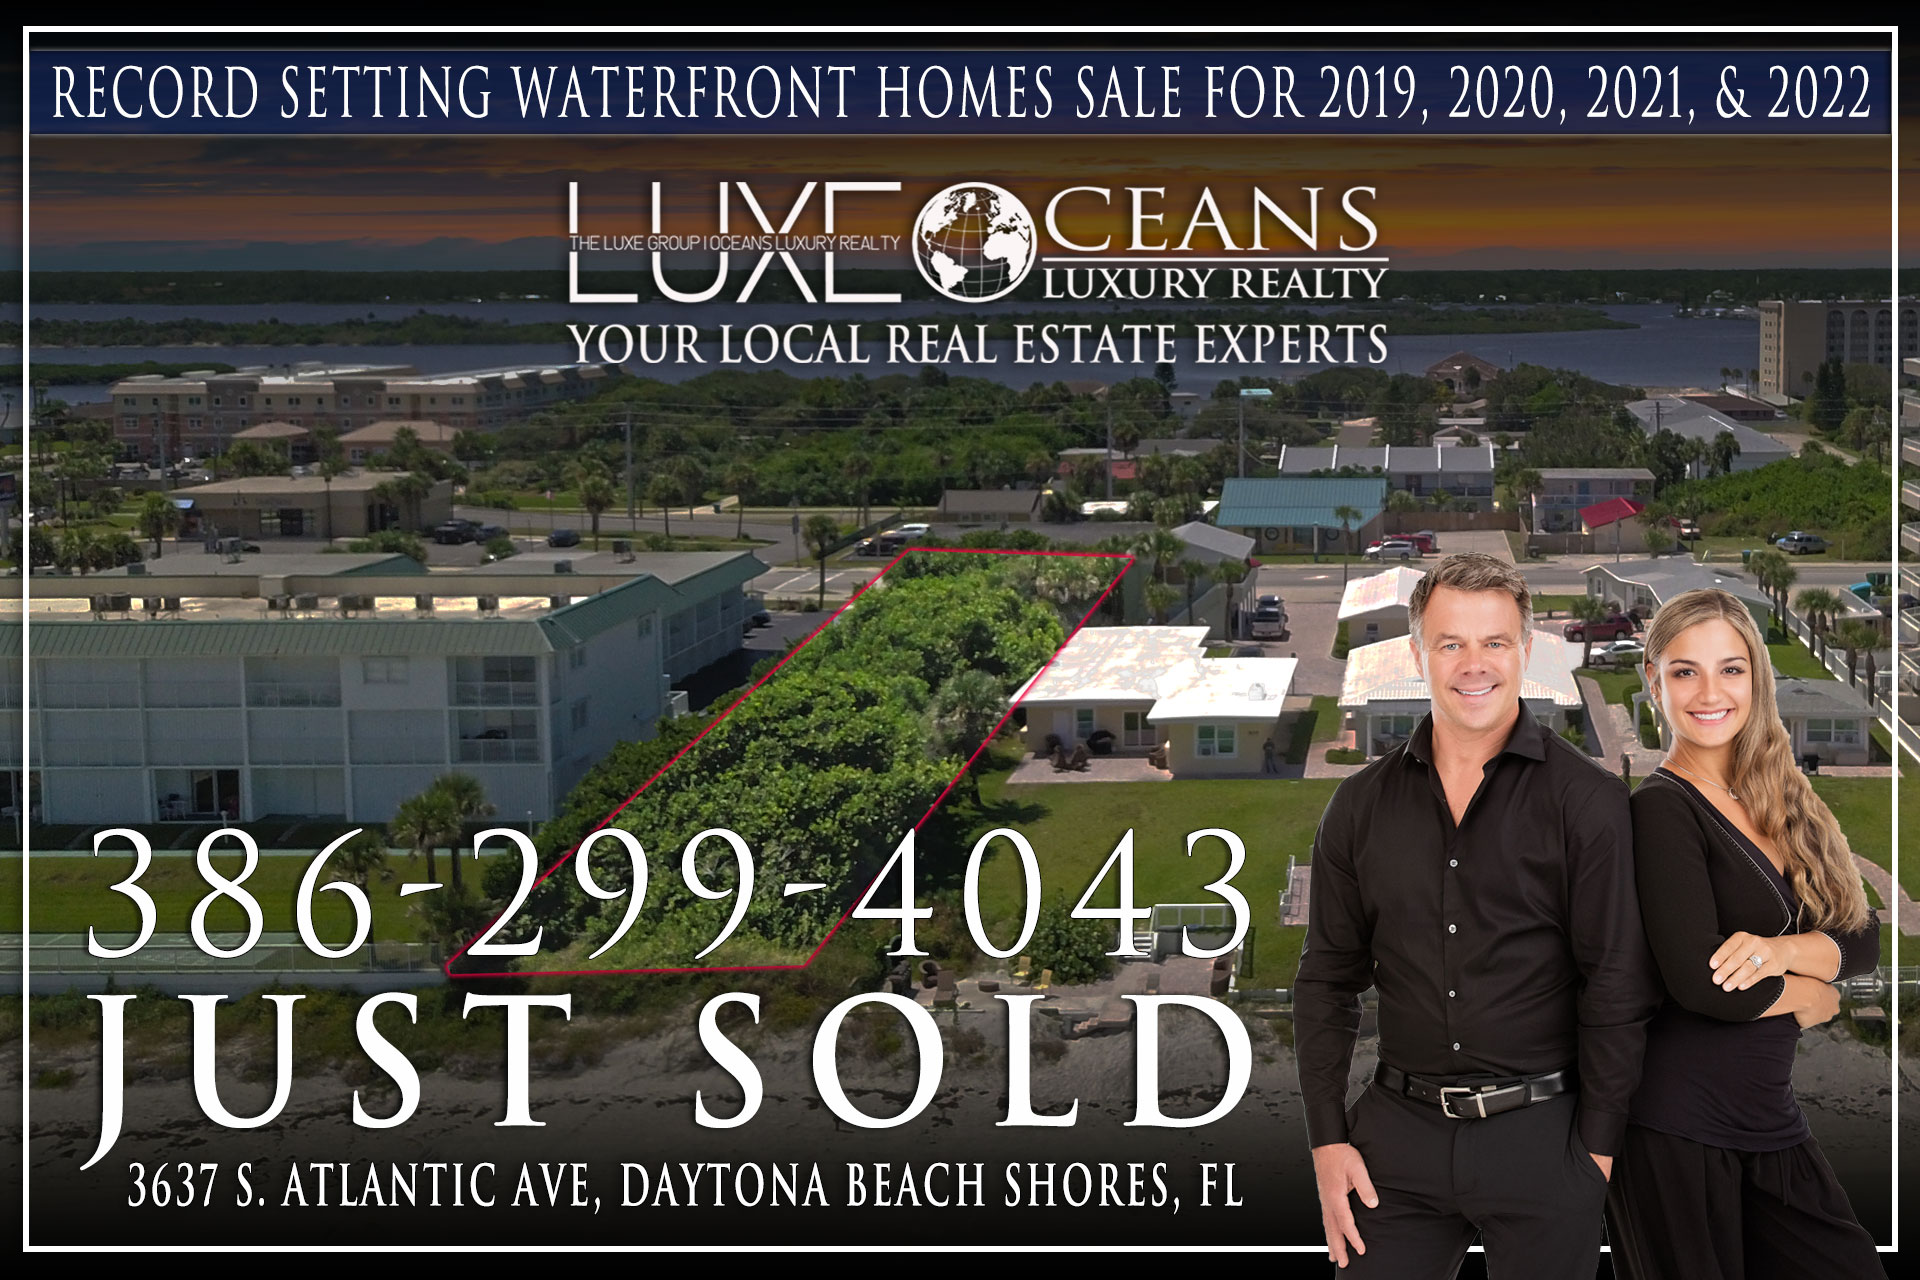 Oceanfront Real Estate For Sale in Daytona Beach Shores, FL. 3637 S Atlantic Ave Now Sold. The LUXE Group at Oceans Luxury Realty 386-299-4043